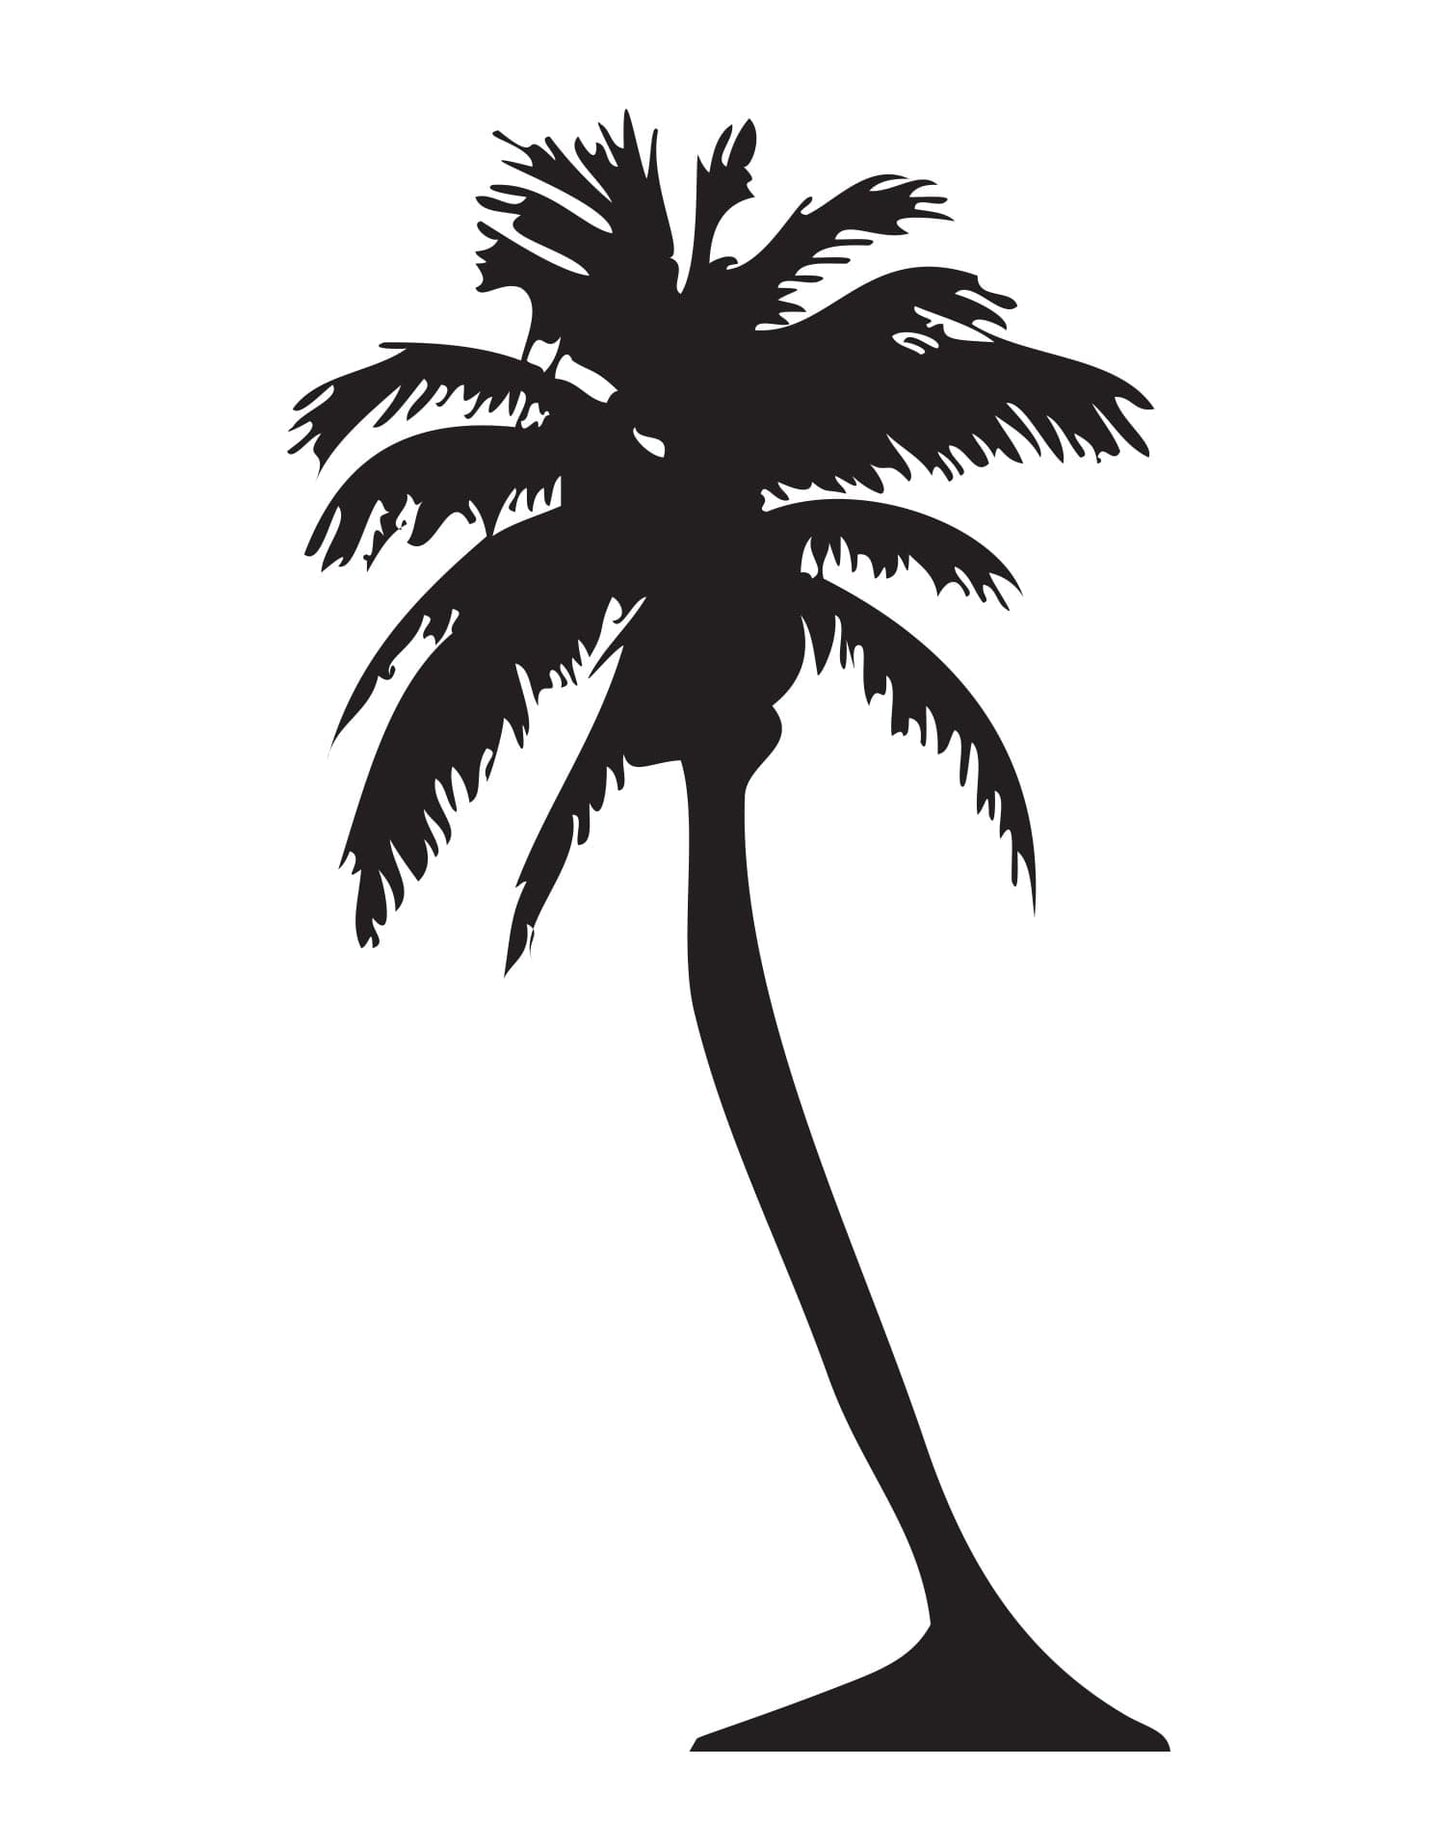 Black palm tree decals on a white background.